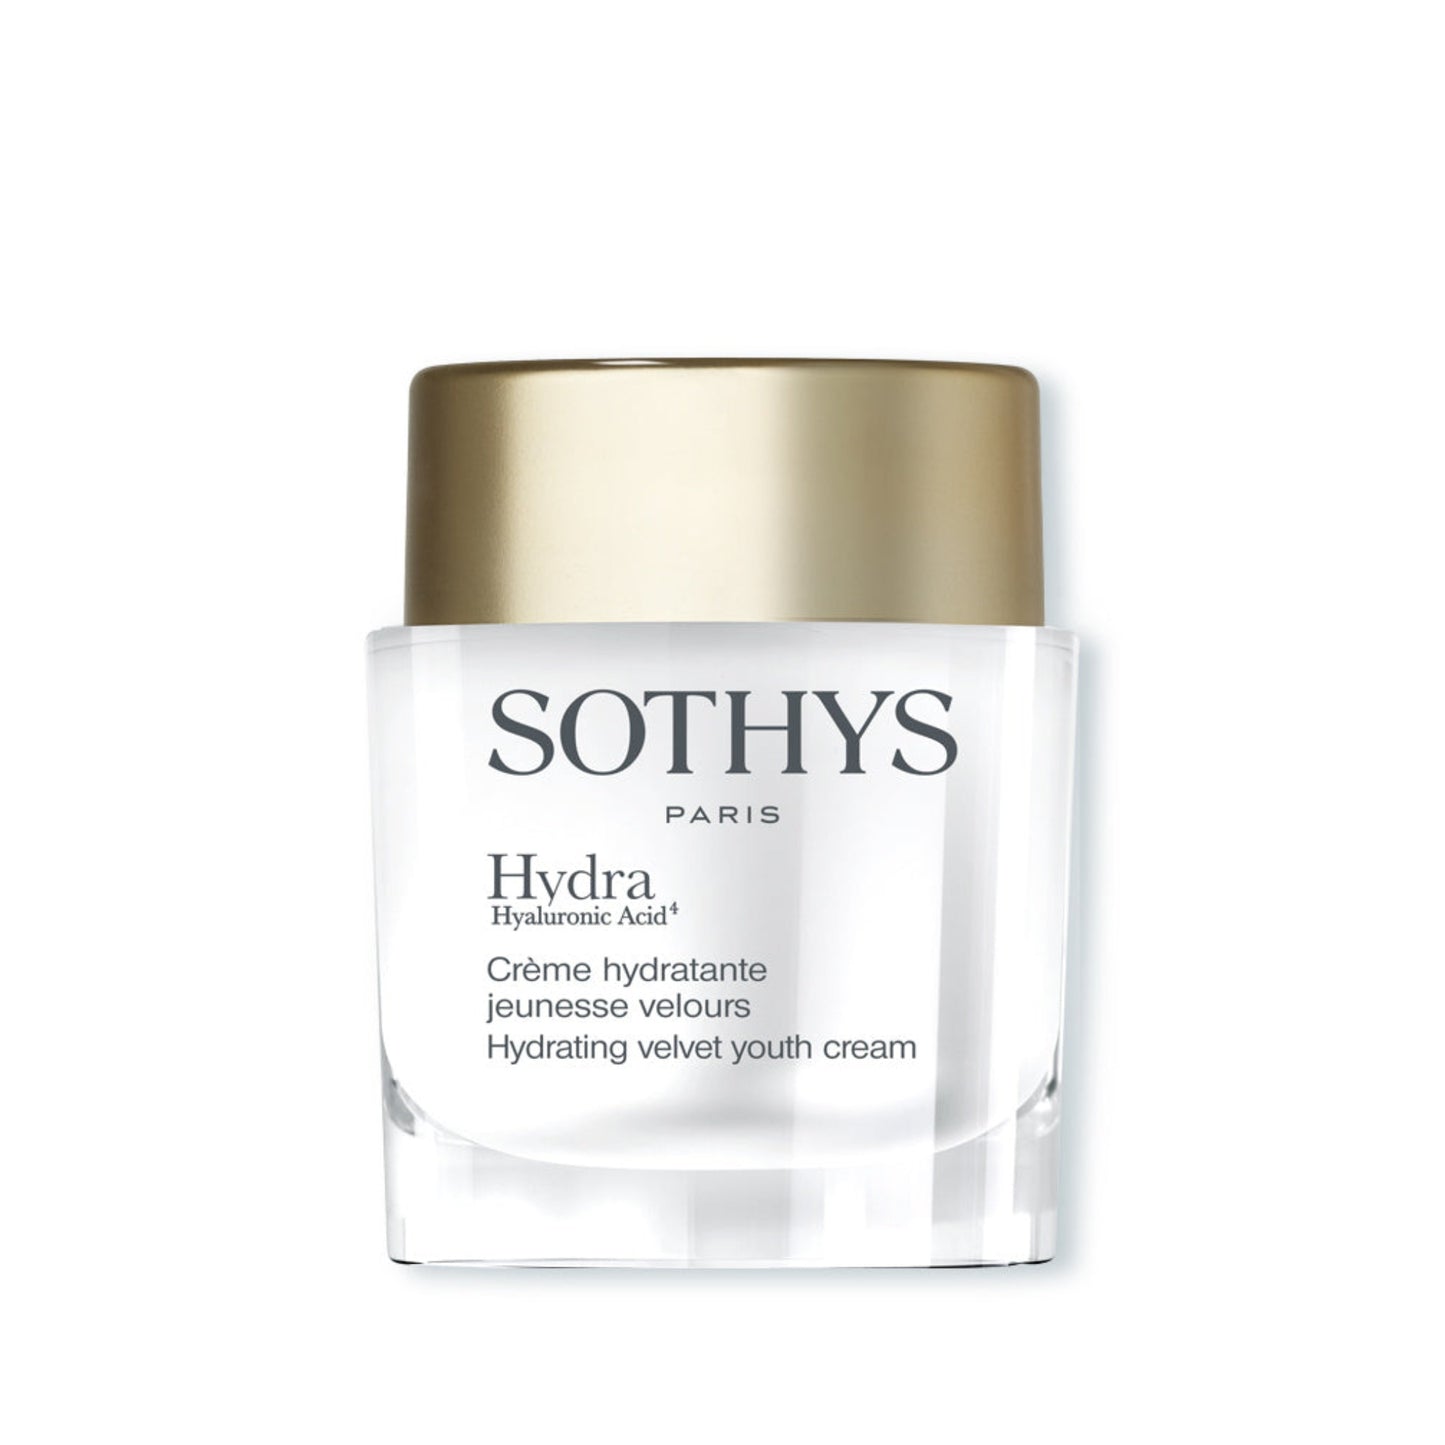 Hydra Hyaluronic Acid Line by Sothys